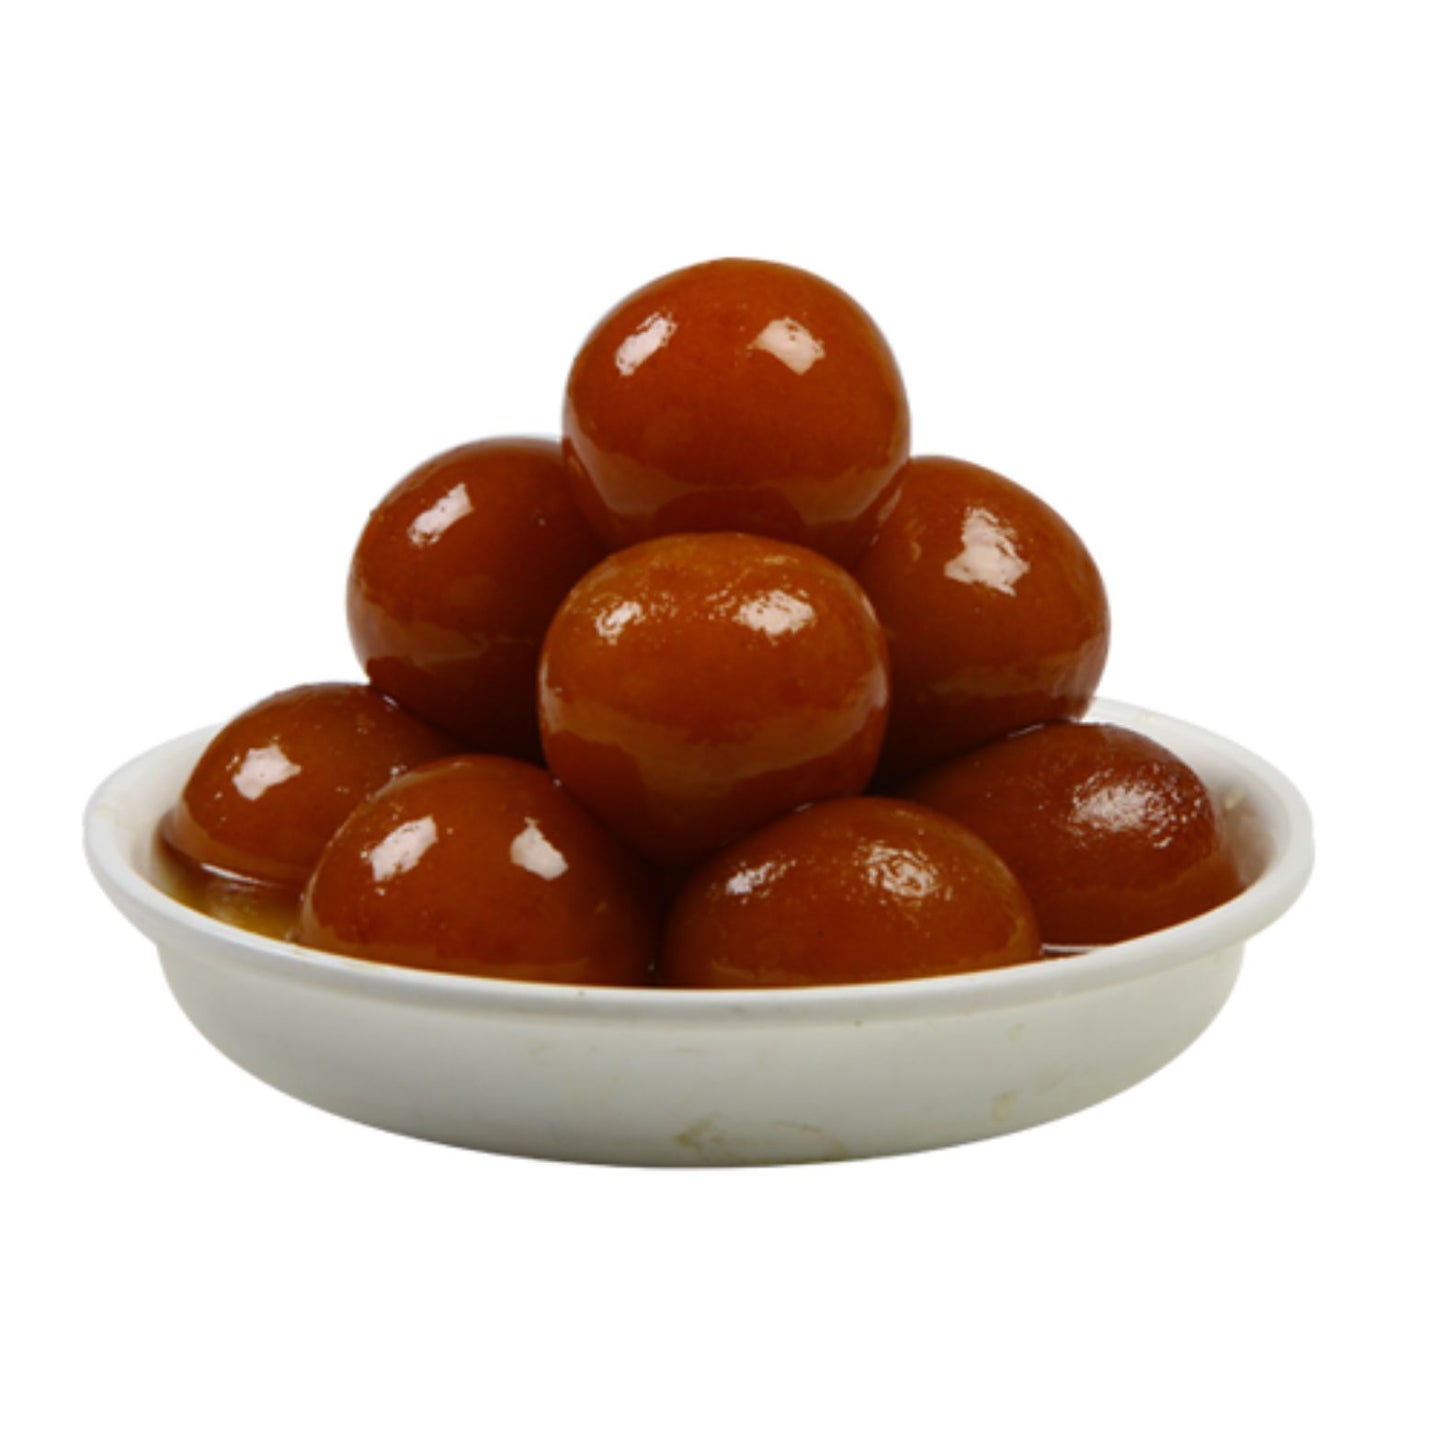 3.7 Kg Classic Gulab Jamun Can - Pack of 4 cans